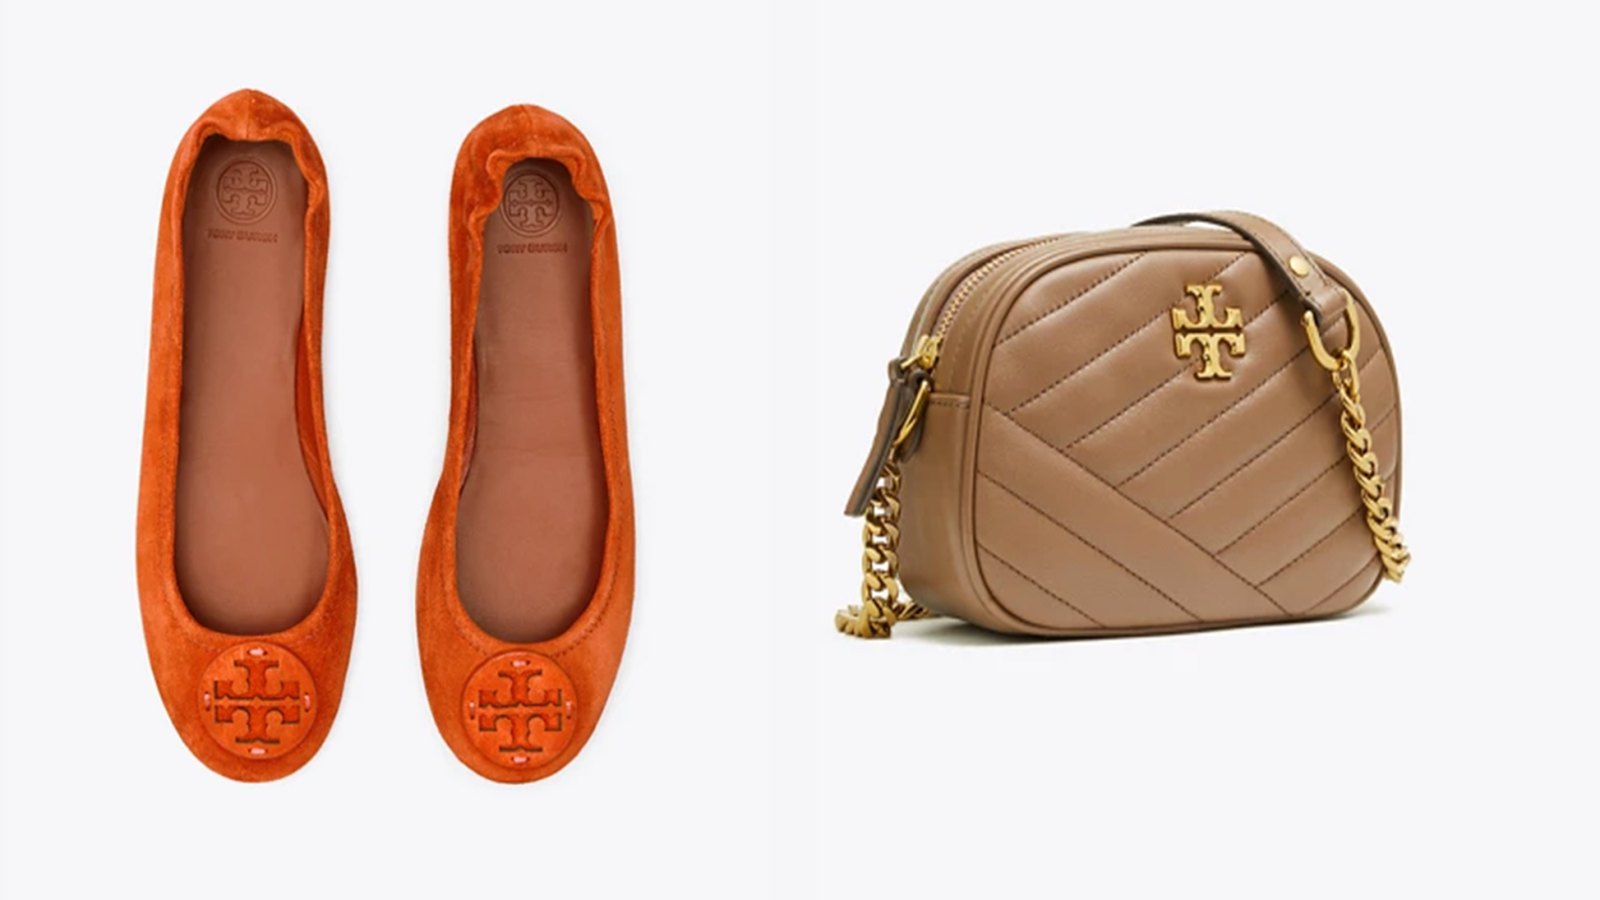 Shop Tory Burch's the Fall Event and Get Up to 30% Off Sitewide!